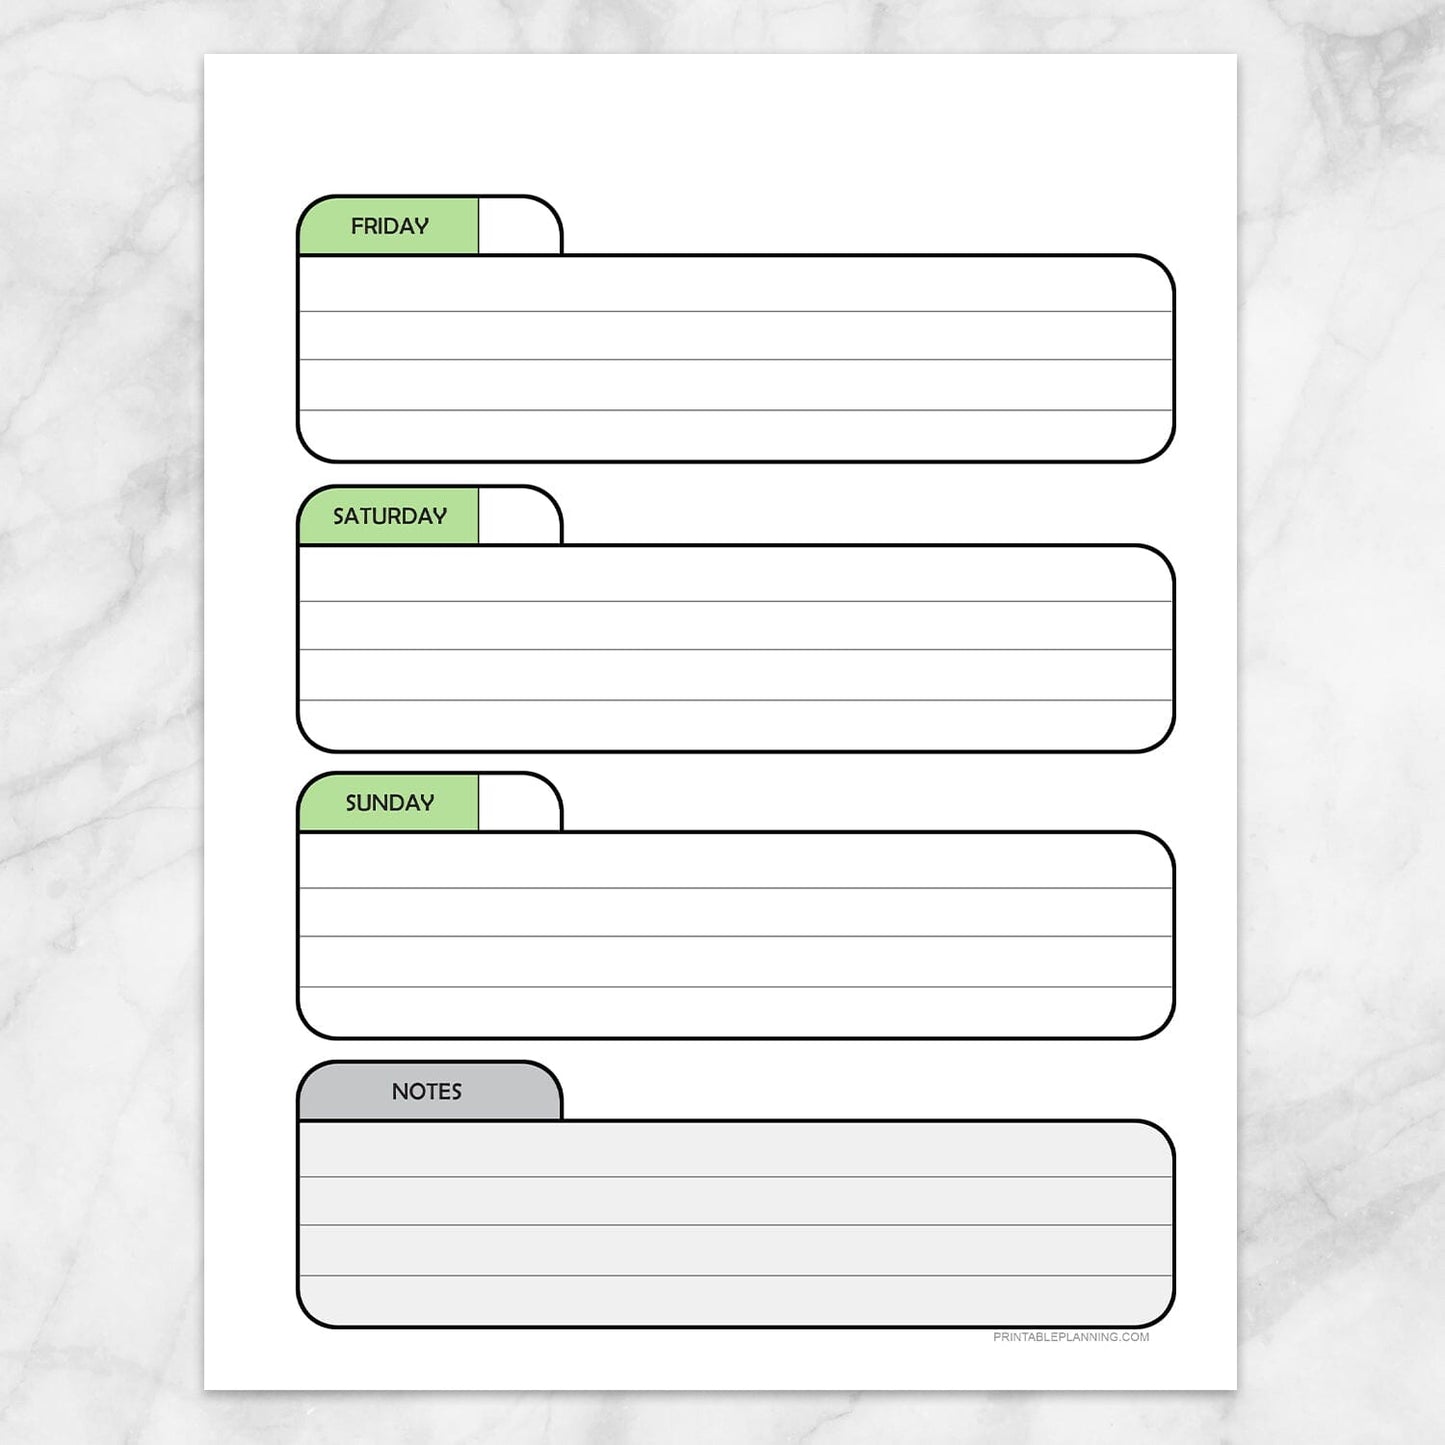 Printable Green Weekly Calendar Planner Page (right page) at Printable Planning.